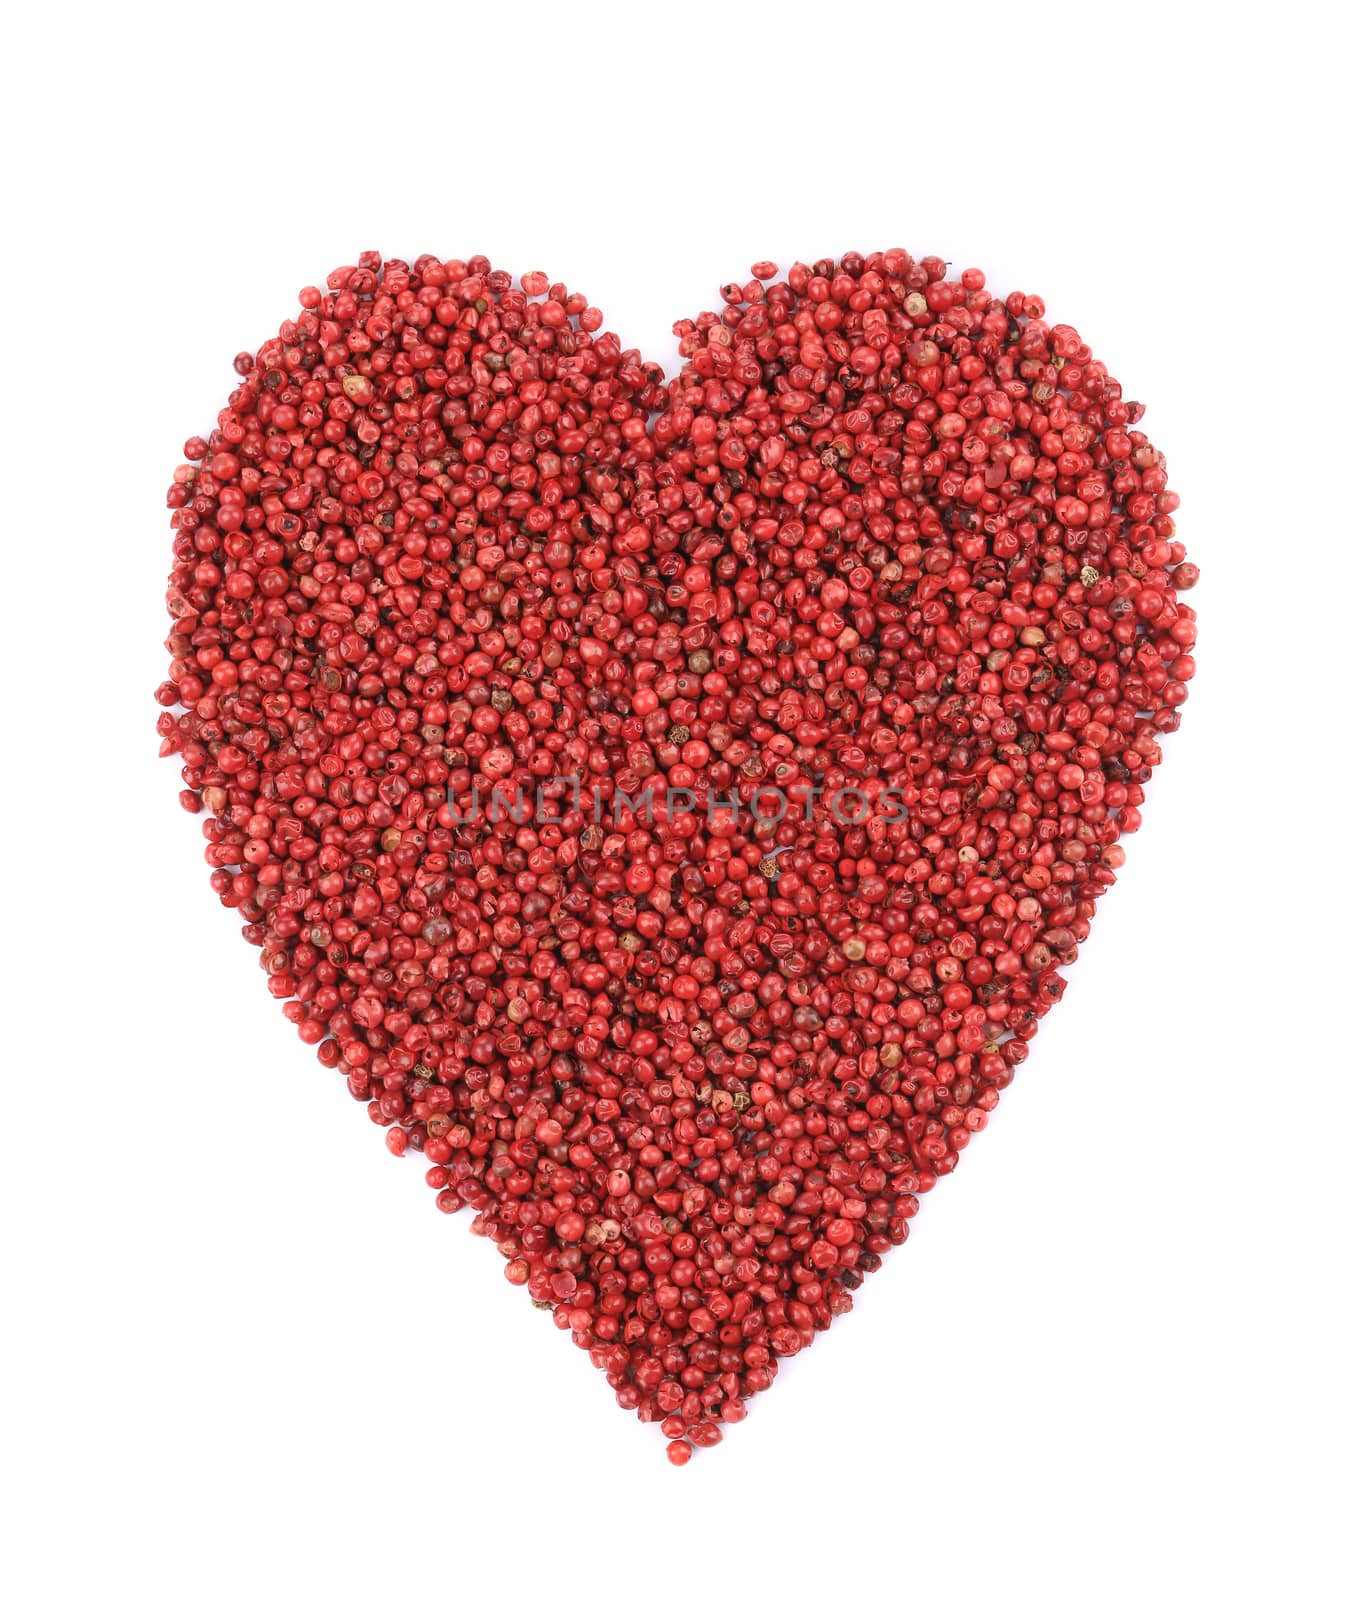 Dried red pepper in shape of heart. Isolated on a white background.